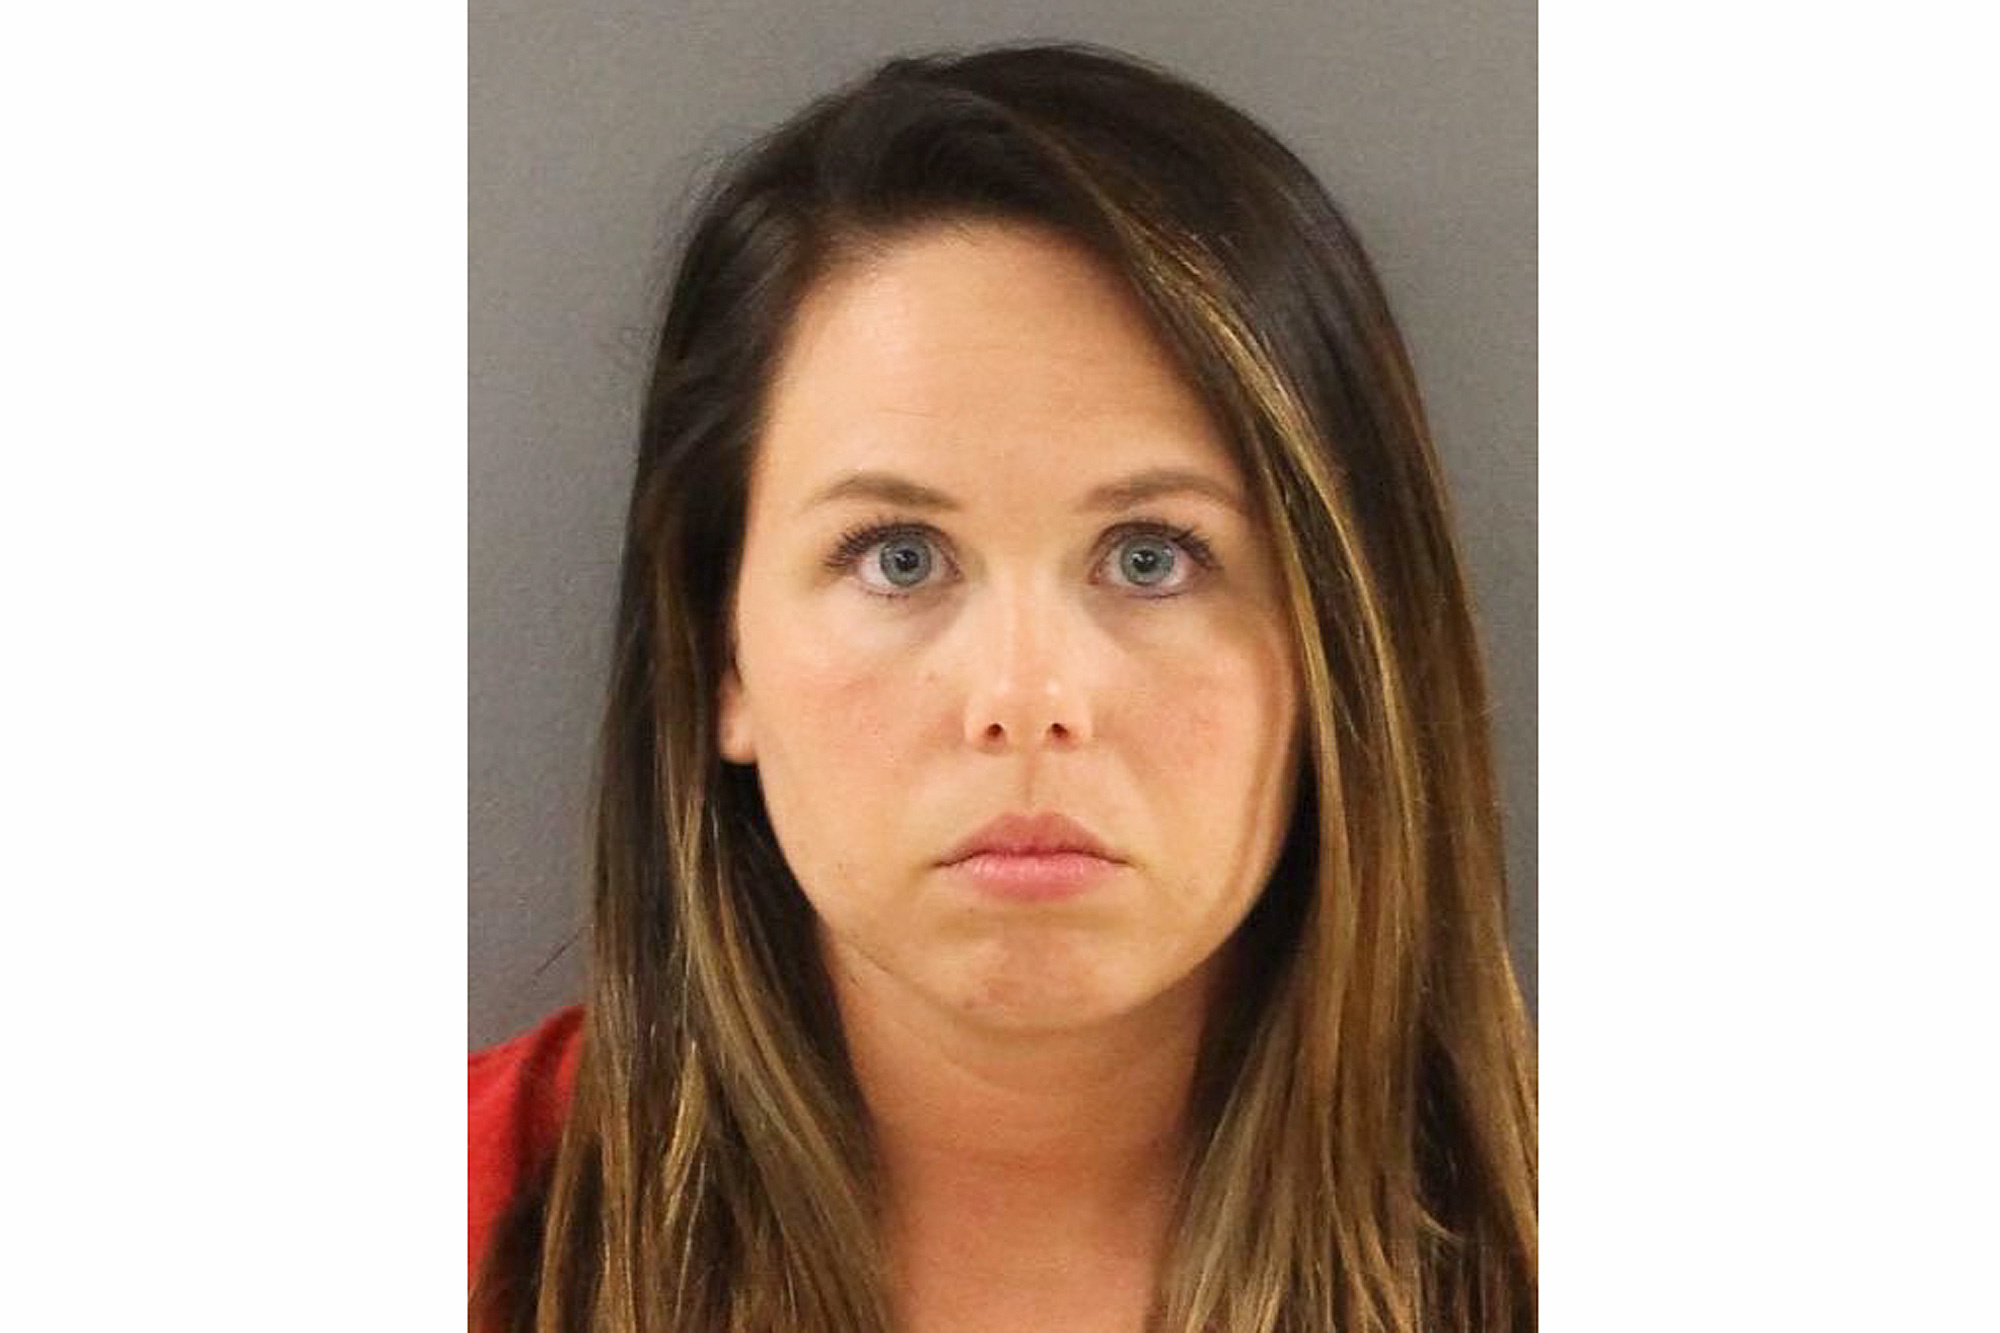 HS Football Coachs Wife Faces Prison After Being Caught Having Sex With One Of His Players pic picture